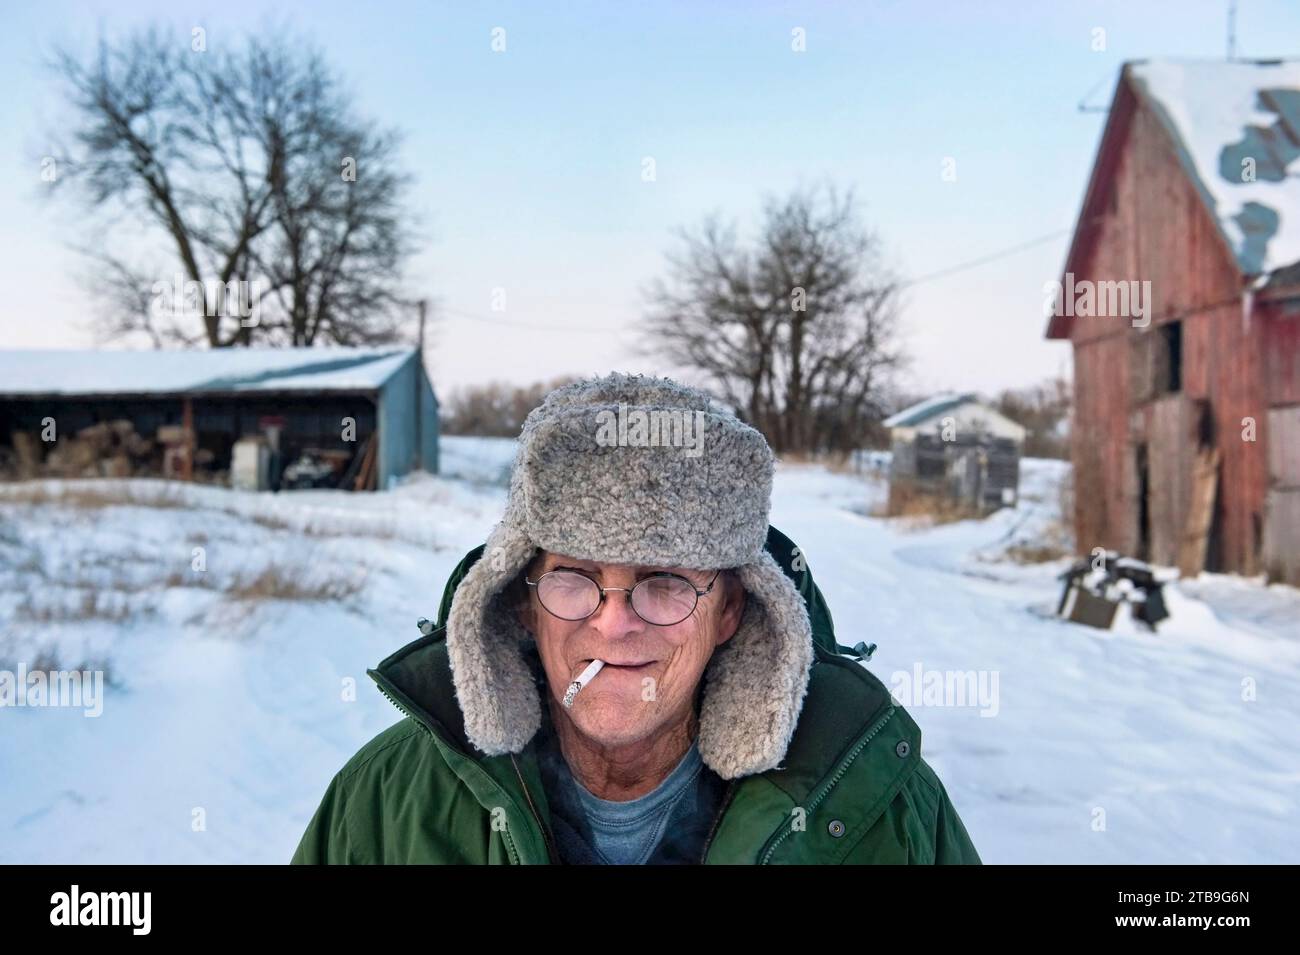 Man smoking a cigarette stands in the snow at a farm; Dunbar, Nebraska, United States of America Stock Photo